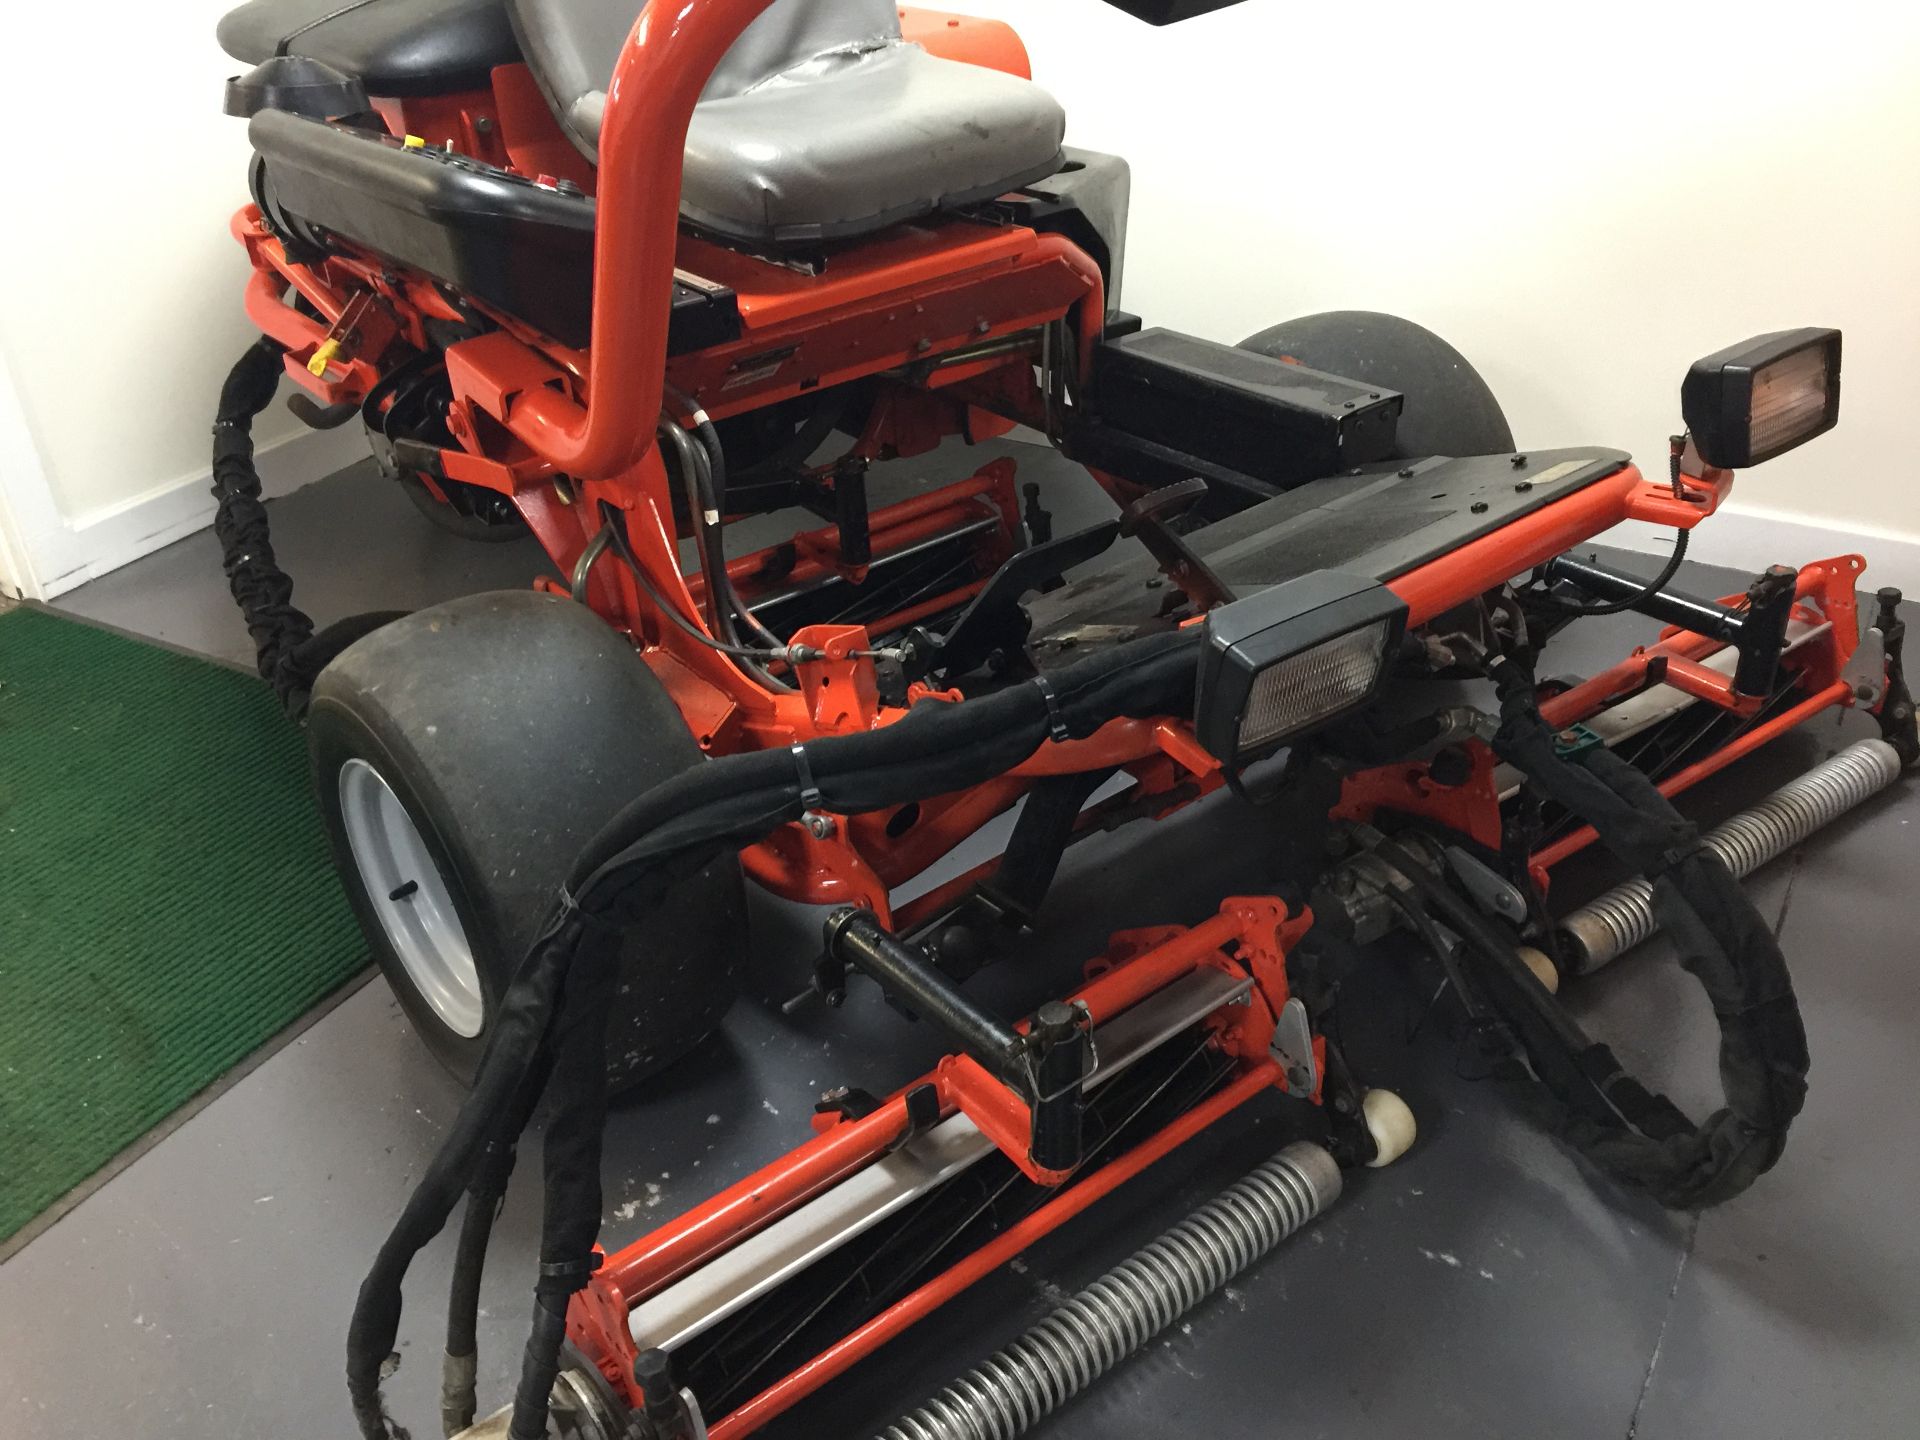 Jacobson Textron Ride-on mower - Image 4 of 6